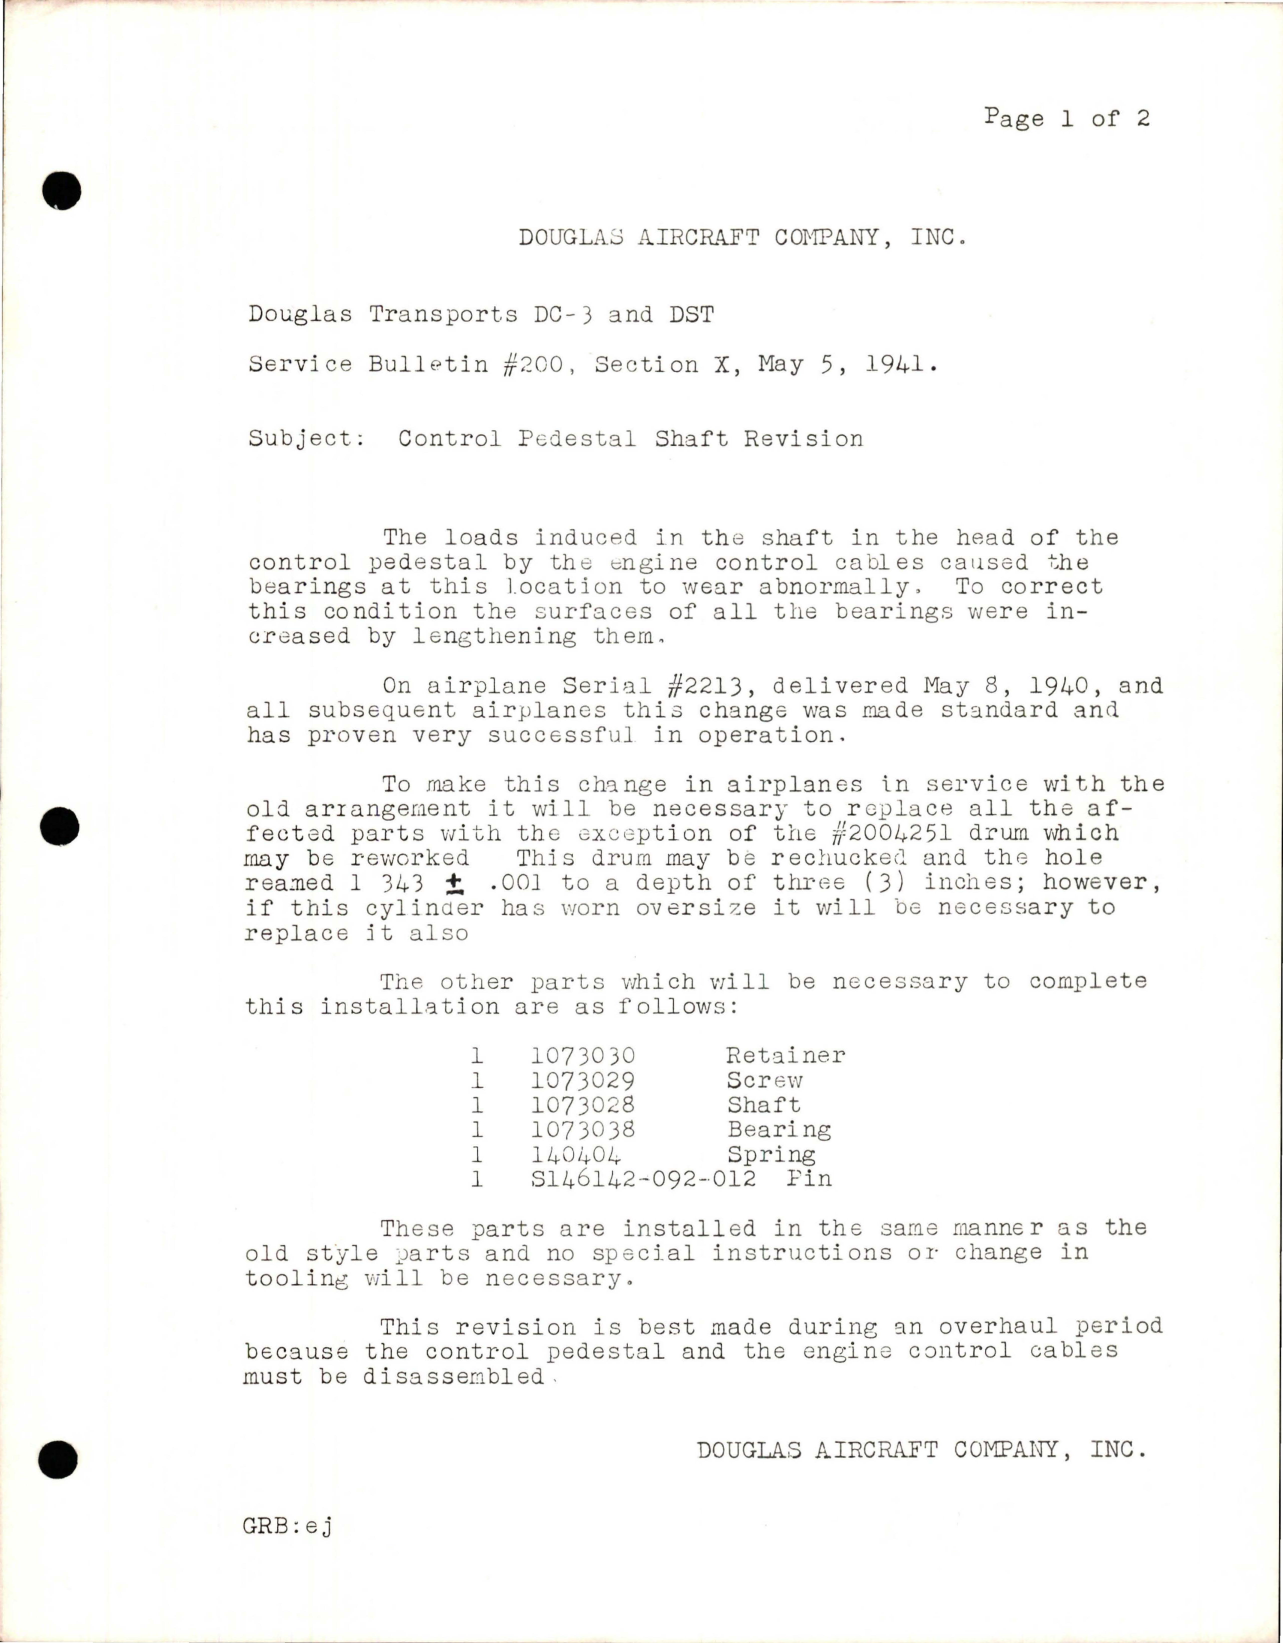 Sample page 1 from AirCorps Library document: Control Pedestal Shaft Revision